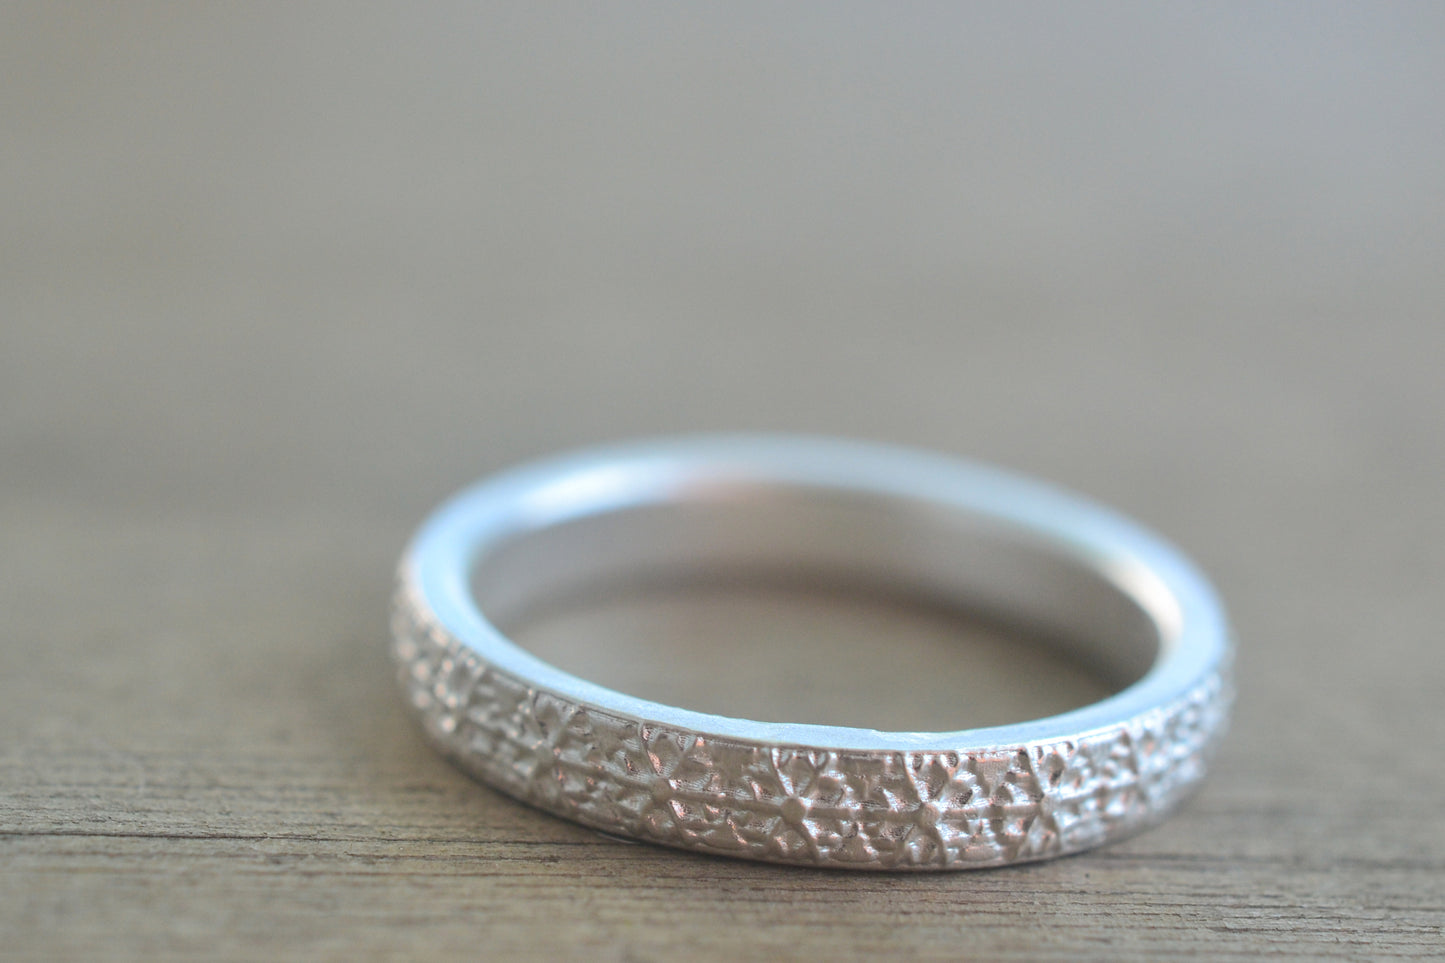 3mm Wide Snowflake Patterned Ring in Silver